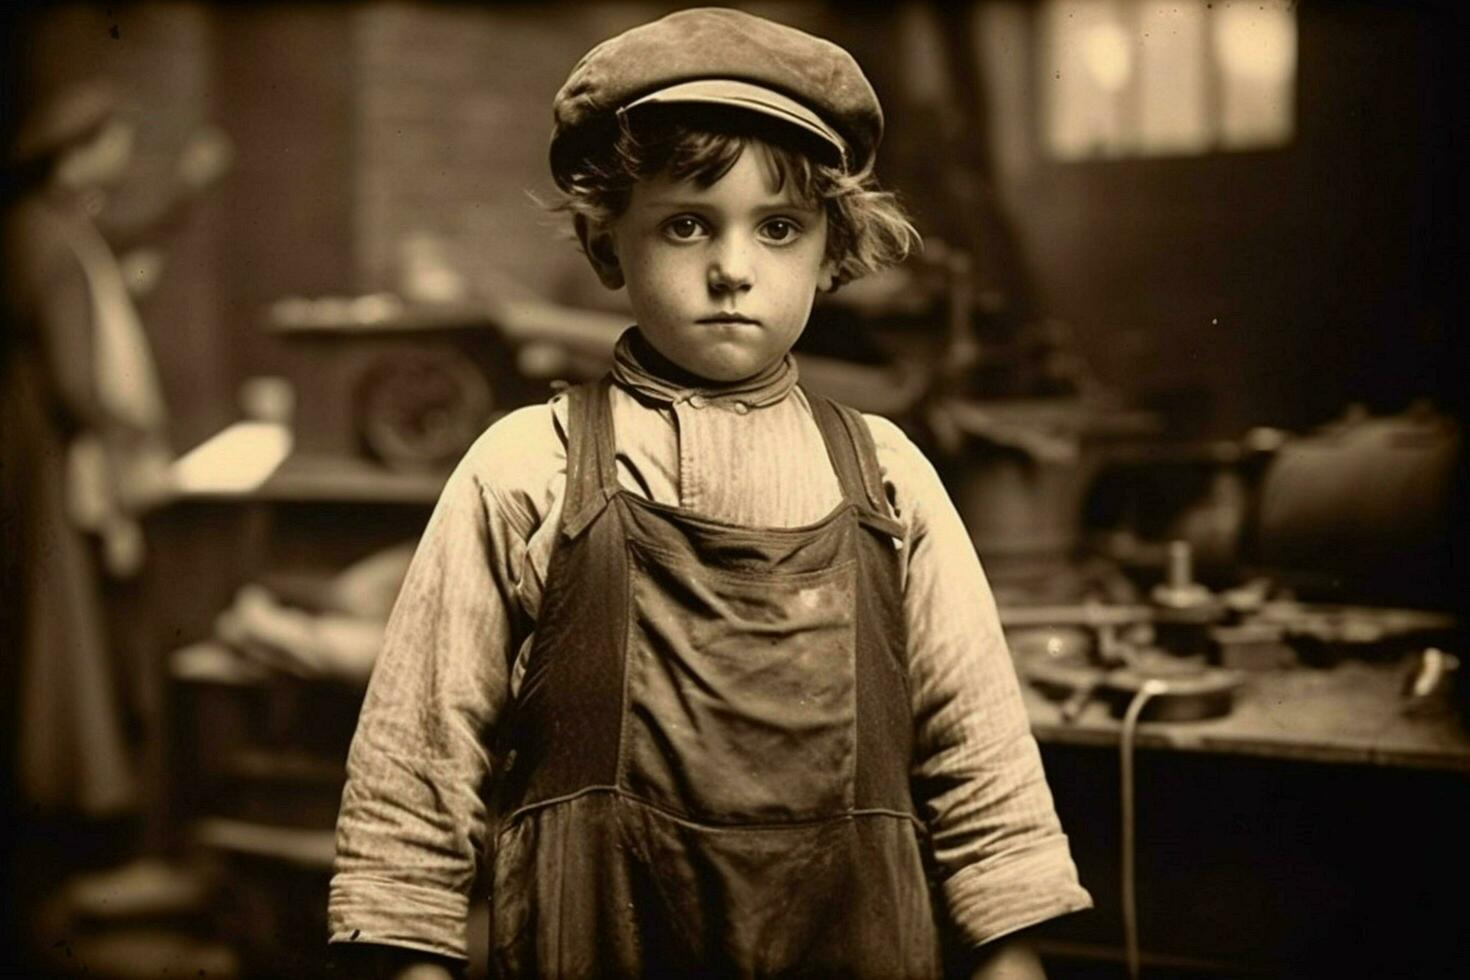 factory cute child worker vintage 1800 year photo